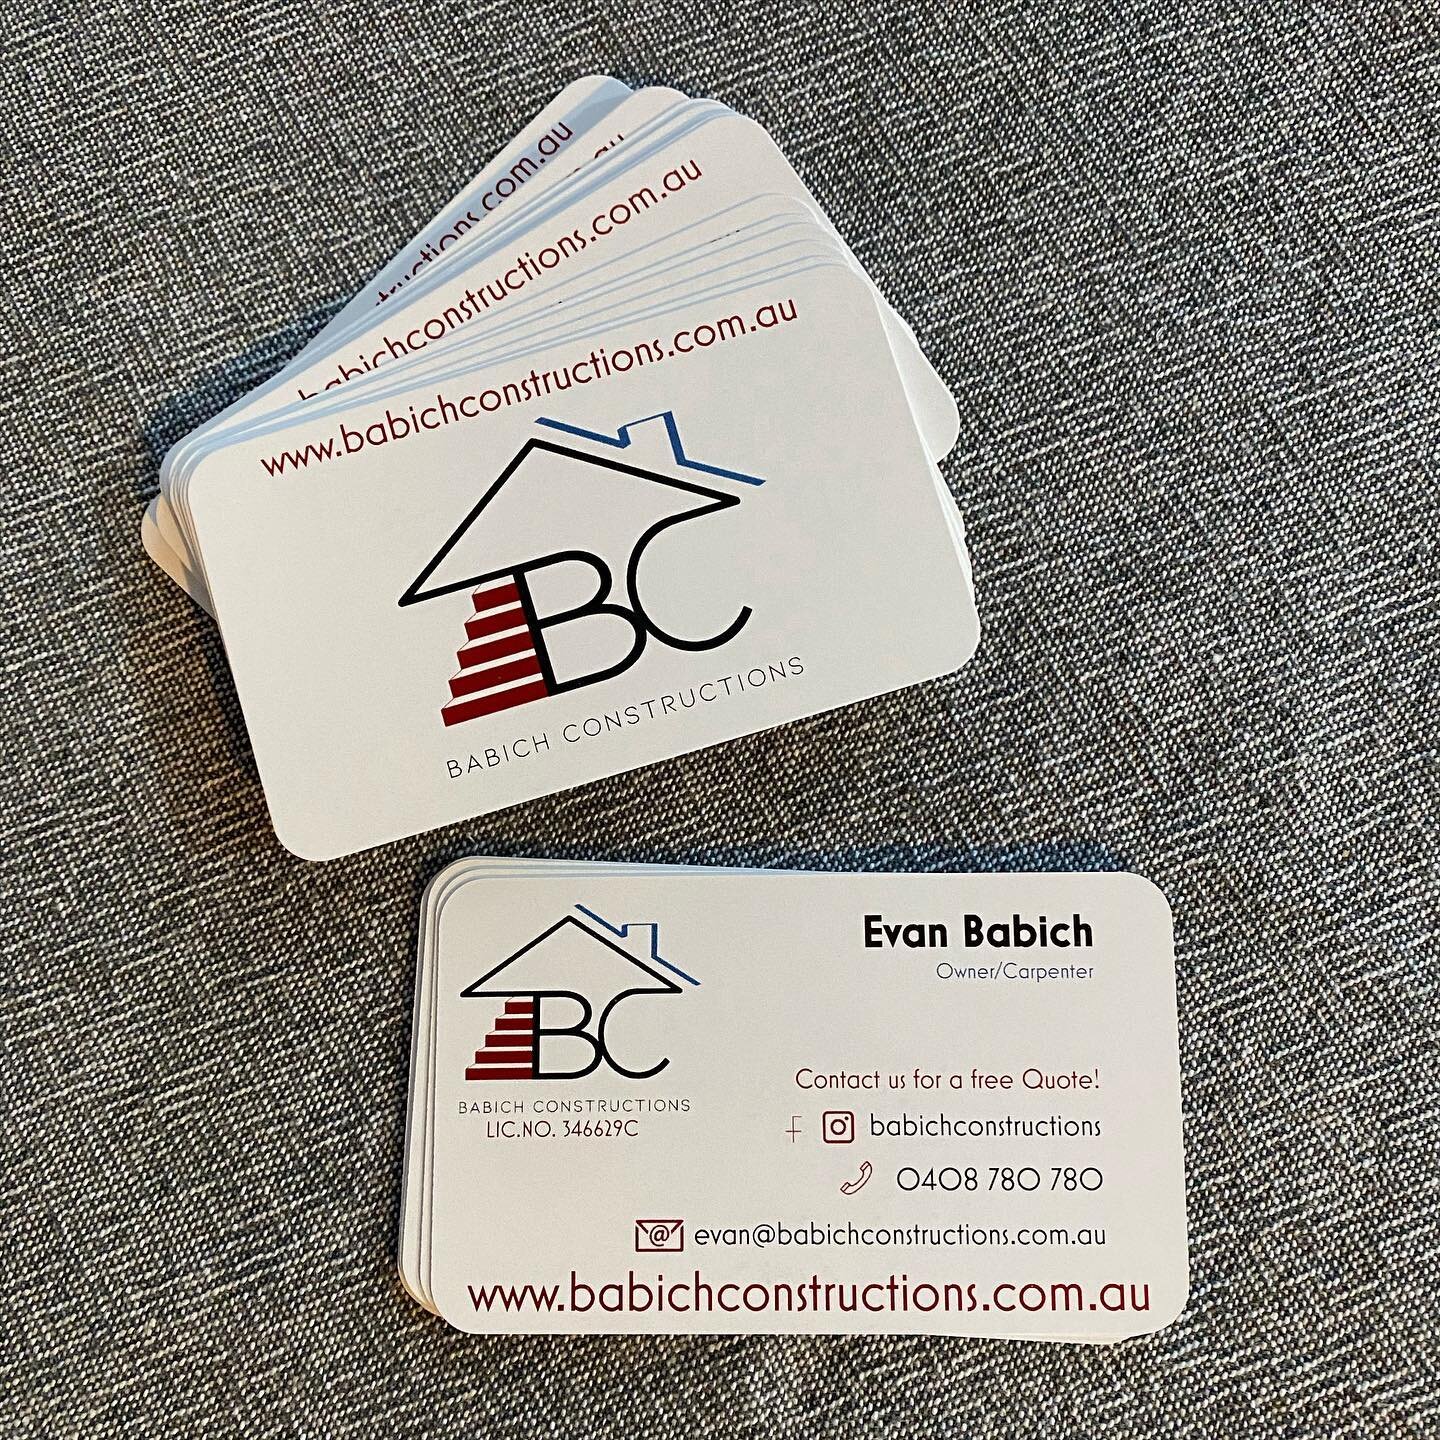 Business cards came in today! 

#babichconstructions  #small #business #sydney #australia #caroentry #building #residential #commercial #industrial